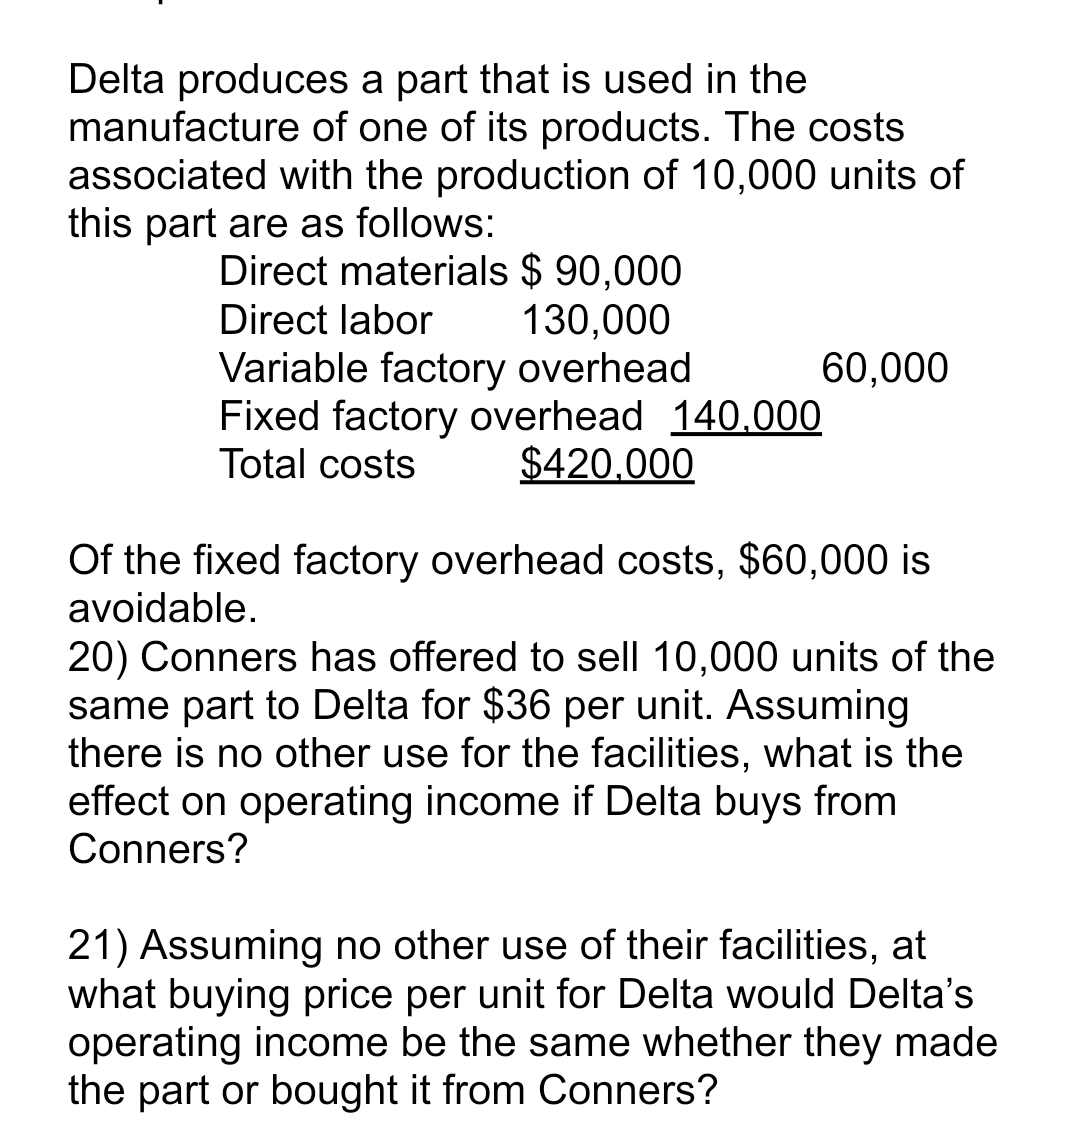 Delta produces a part that is used in the
manufacture of one of its products. The costs
associated with the production of 10,000 units of
this part are as follows:
Direct materials $ 90,000
Direct labor
130,000
Variable factory overhead
Fixed factory overhead 140,000
Total costs $420,000
60,000
Of the fixed factory overhead costs, $60,000 is
avoidable.
20) Conners has offered to sell 10,000 units of the
same part to Delta for $36 per unit. Assuming
there is no other use for the facilities, what is the
effect on operating income if Delta buys from
Conners?
21) Assuming no other use of their facilities, at
what buying price per unit for Delta would Delta's
operating income be the same whether they made
the part or bought it from Conners?